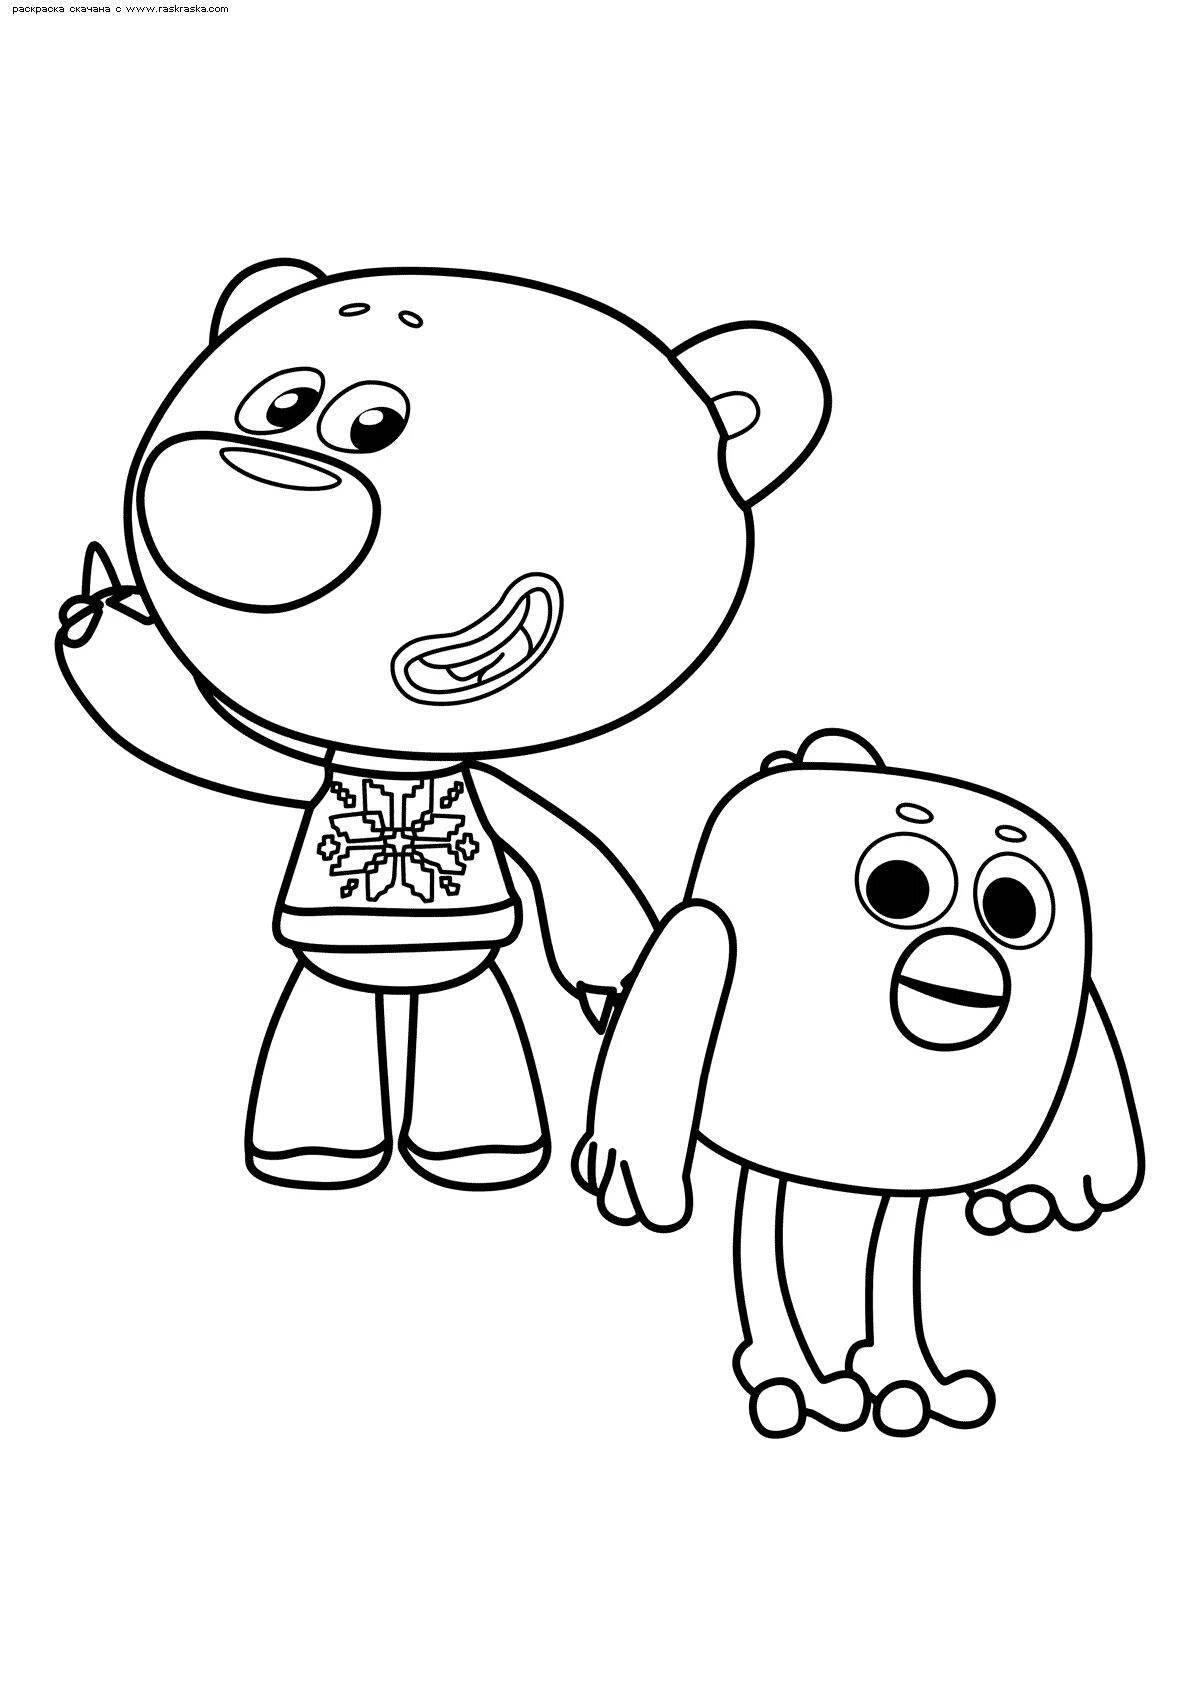 Cute cute innocent coloring page